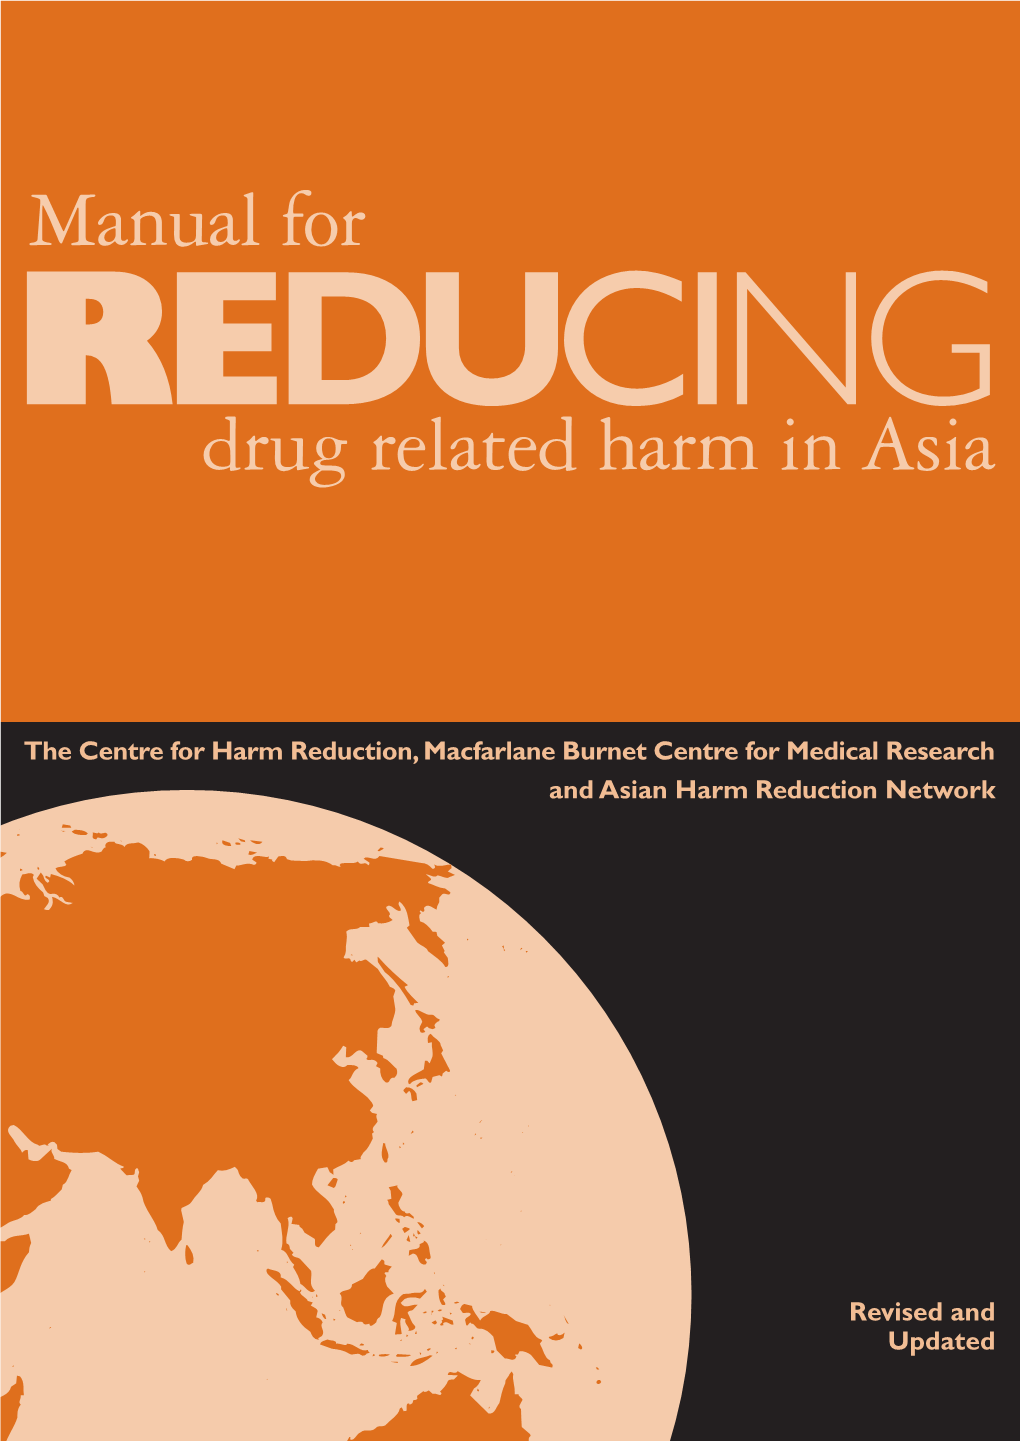 Manual for Reducing Drug Related Harm in Asia the Centre for Harm Reduction, Macfarlane Burnet Centre for Medical Research and Asian Harm Reduction Network